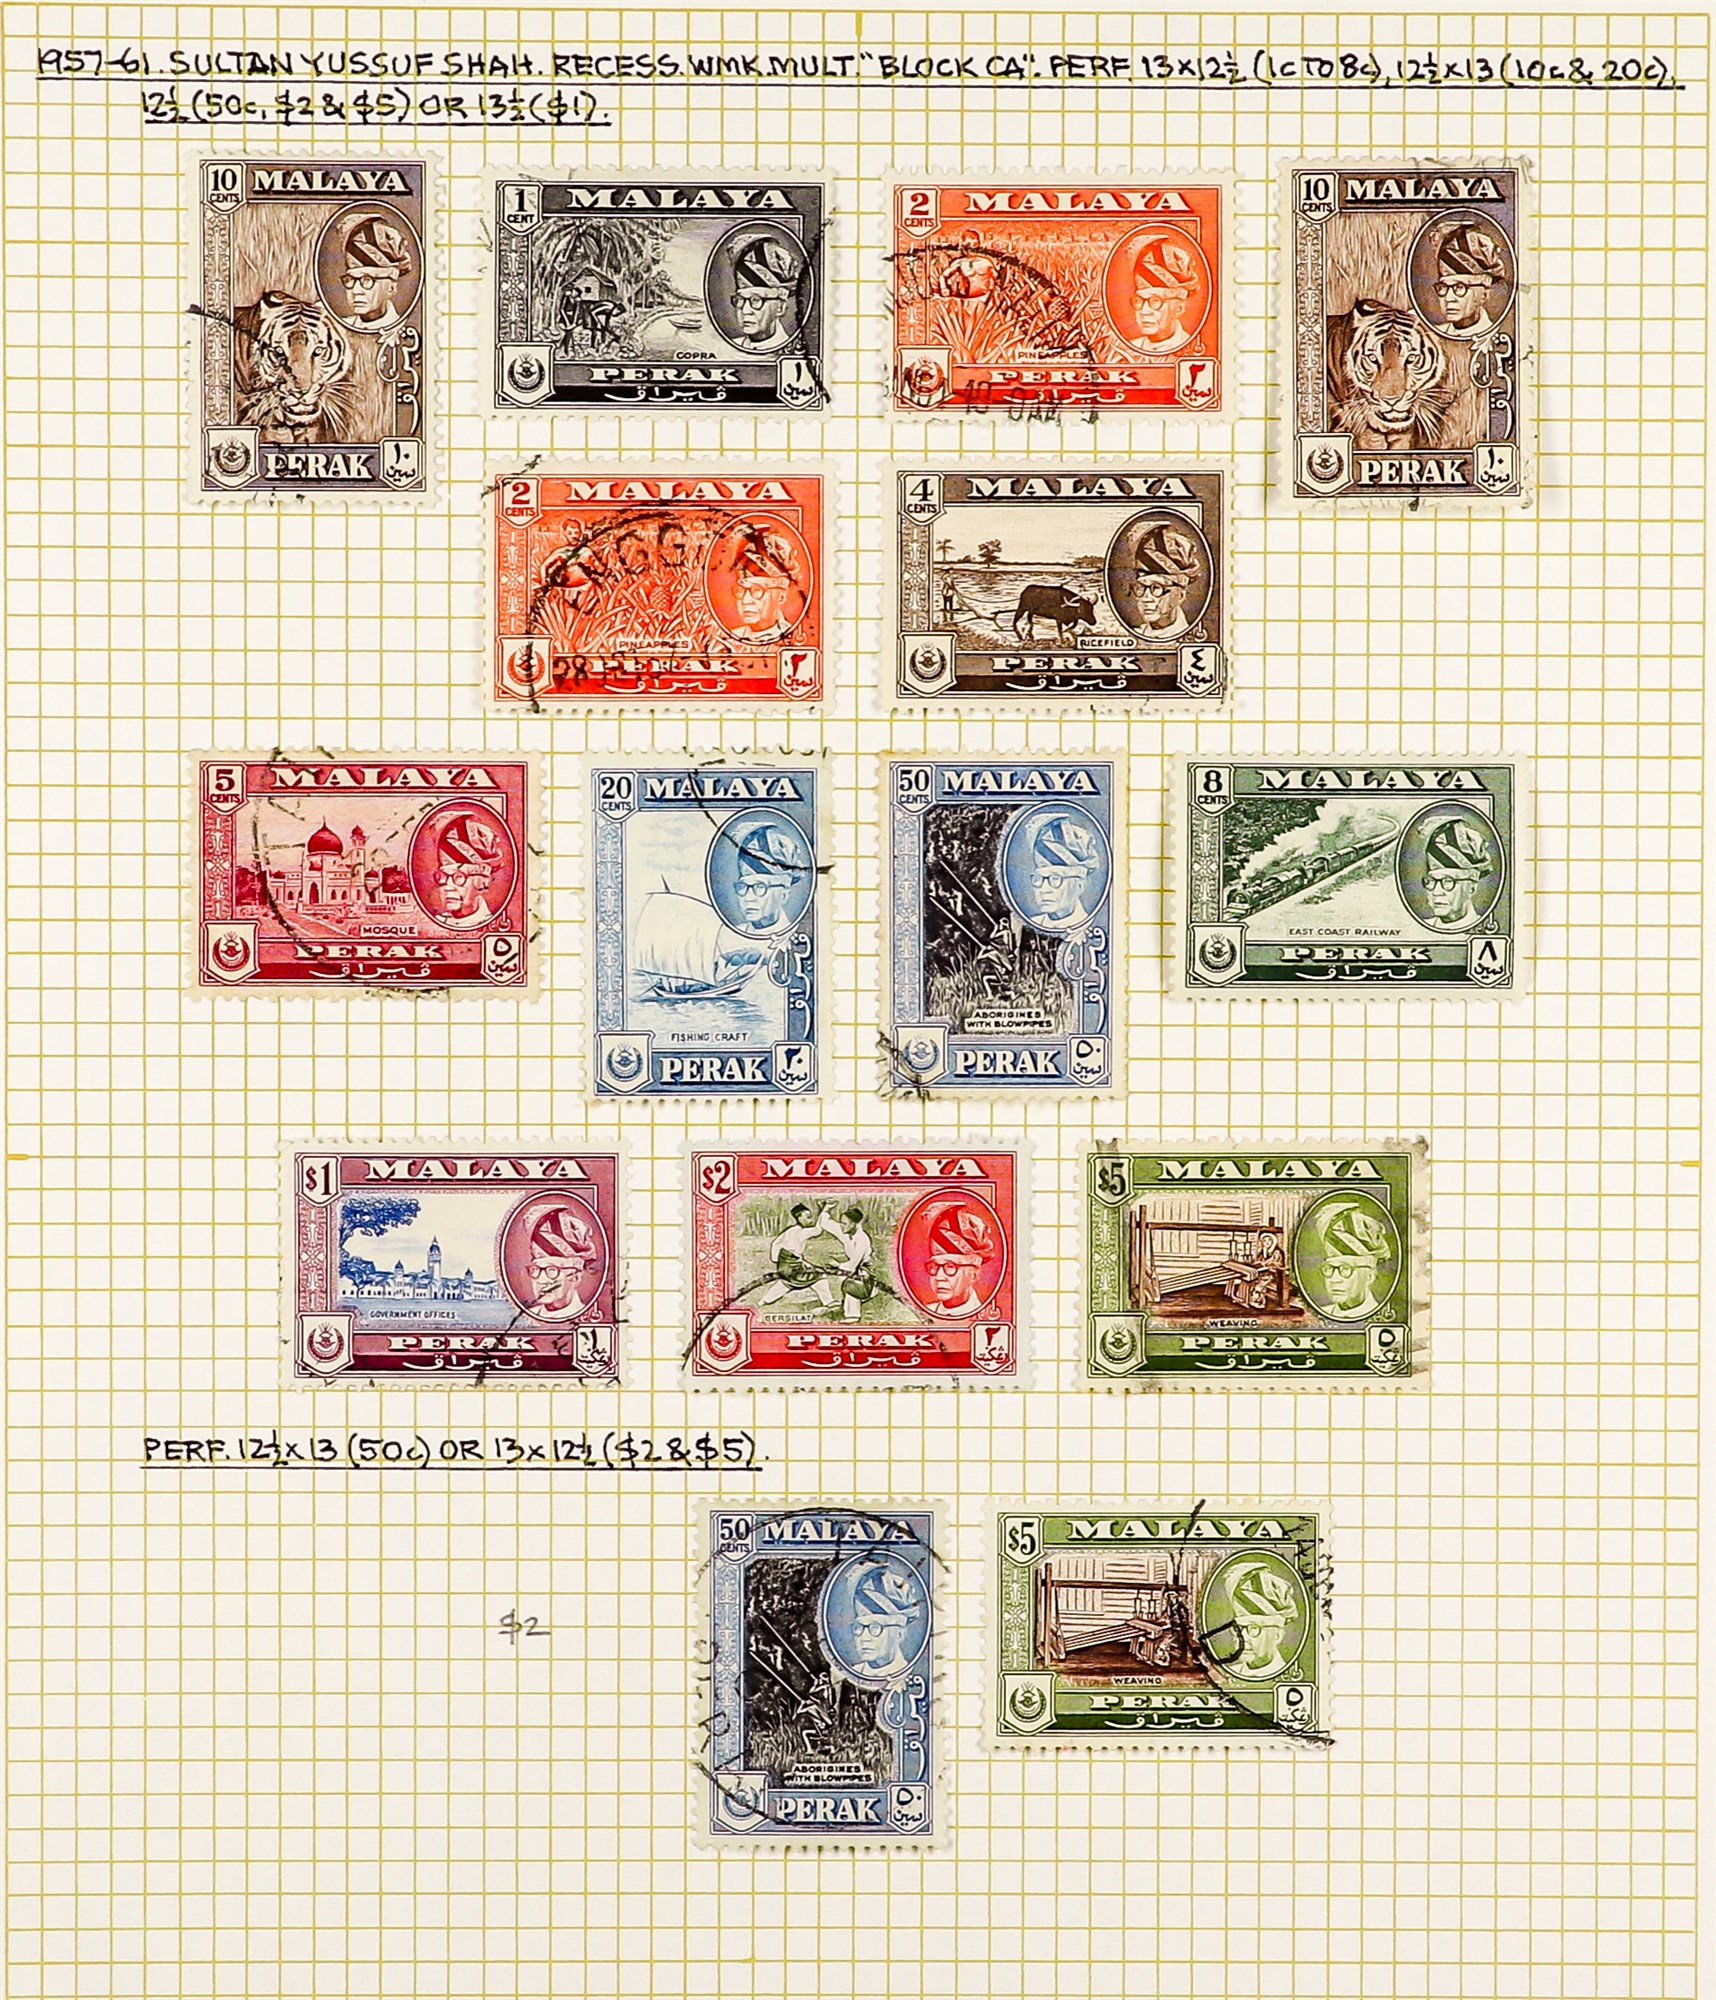 MALAYA STATES PERAK 1884 - 1965 COLLECTION of over 100 chiefly very fine used stamps on several - Image 6 of 7